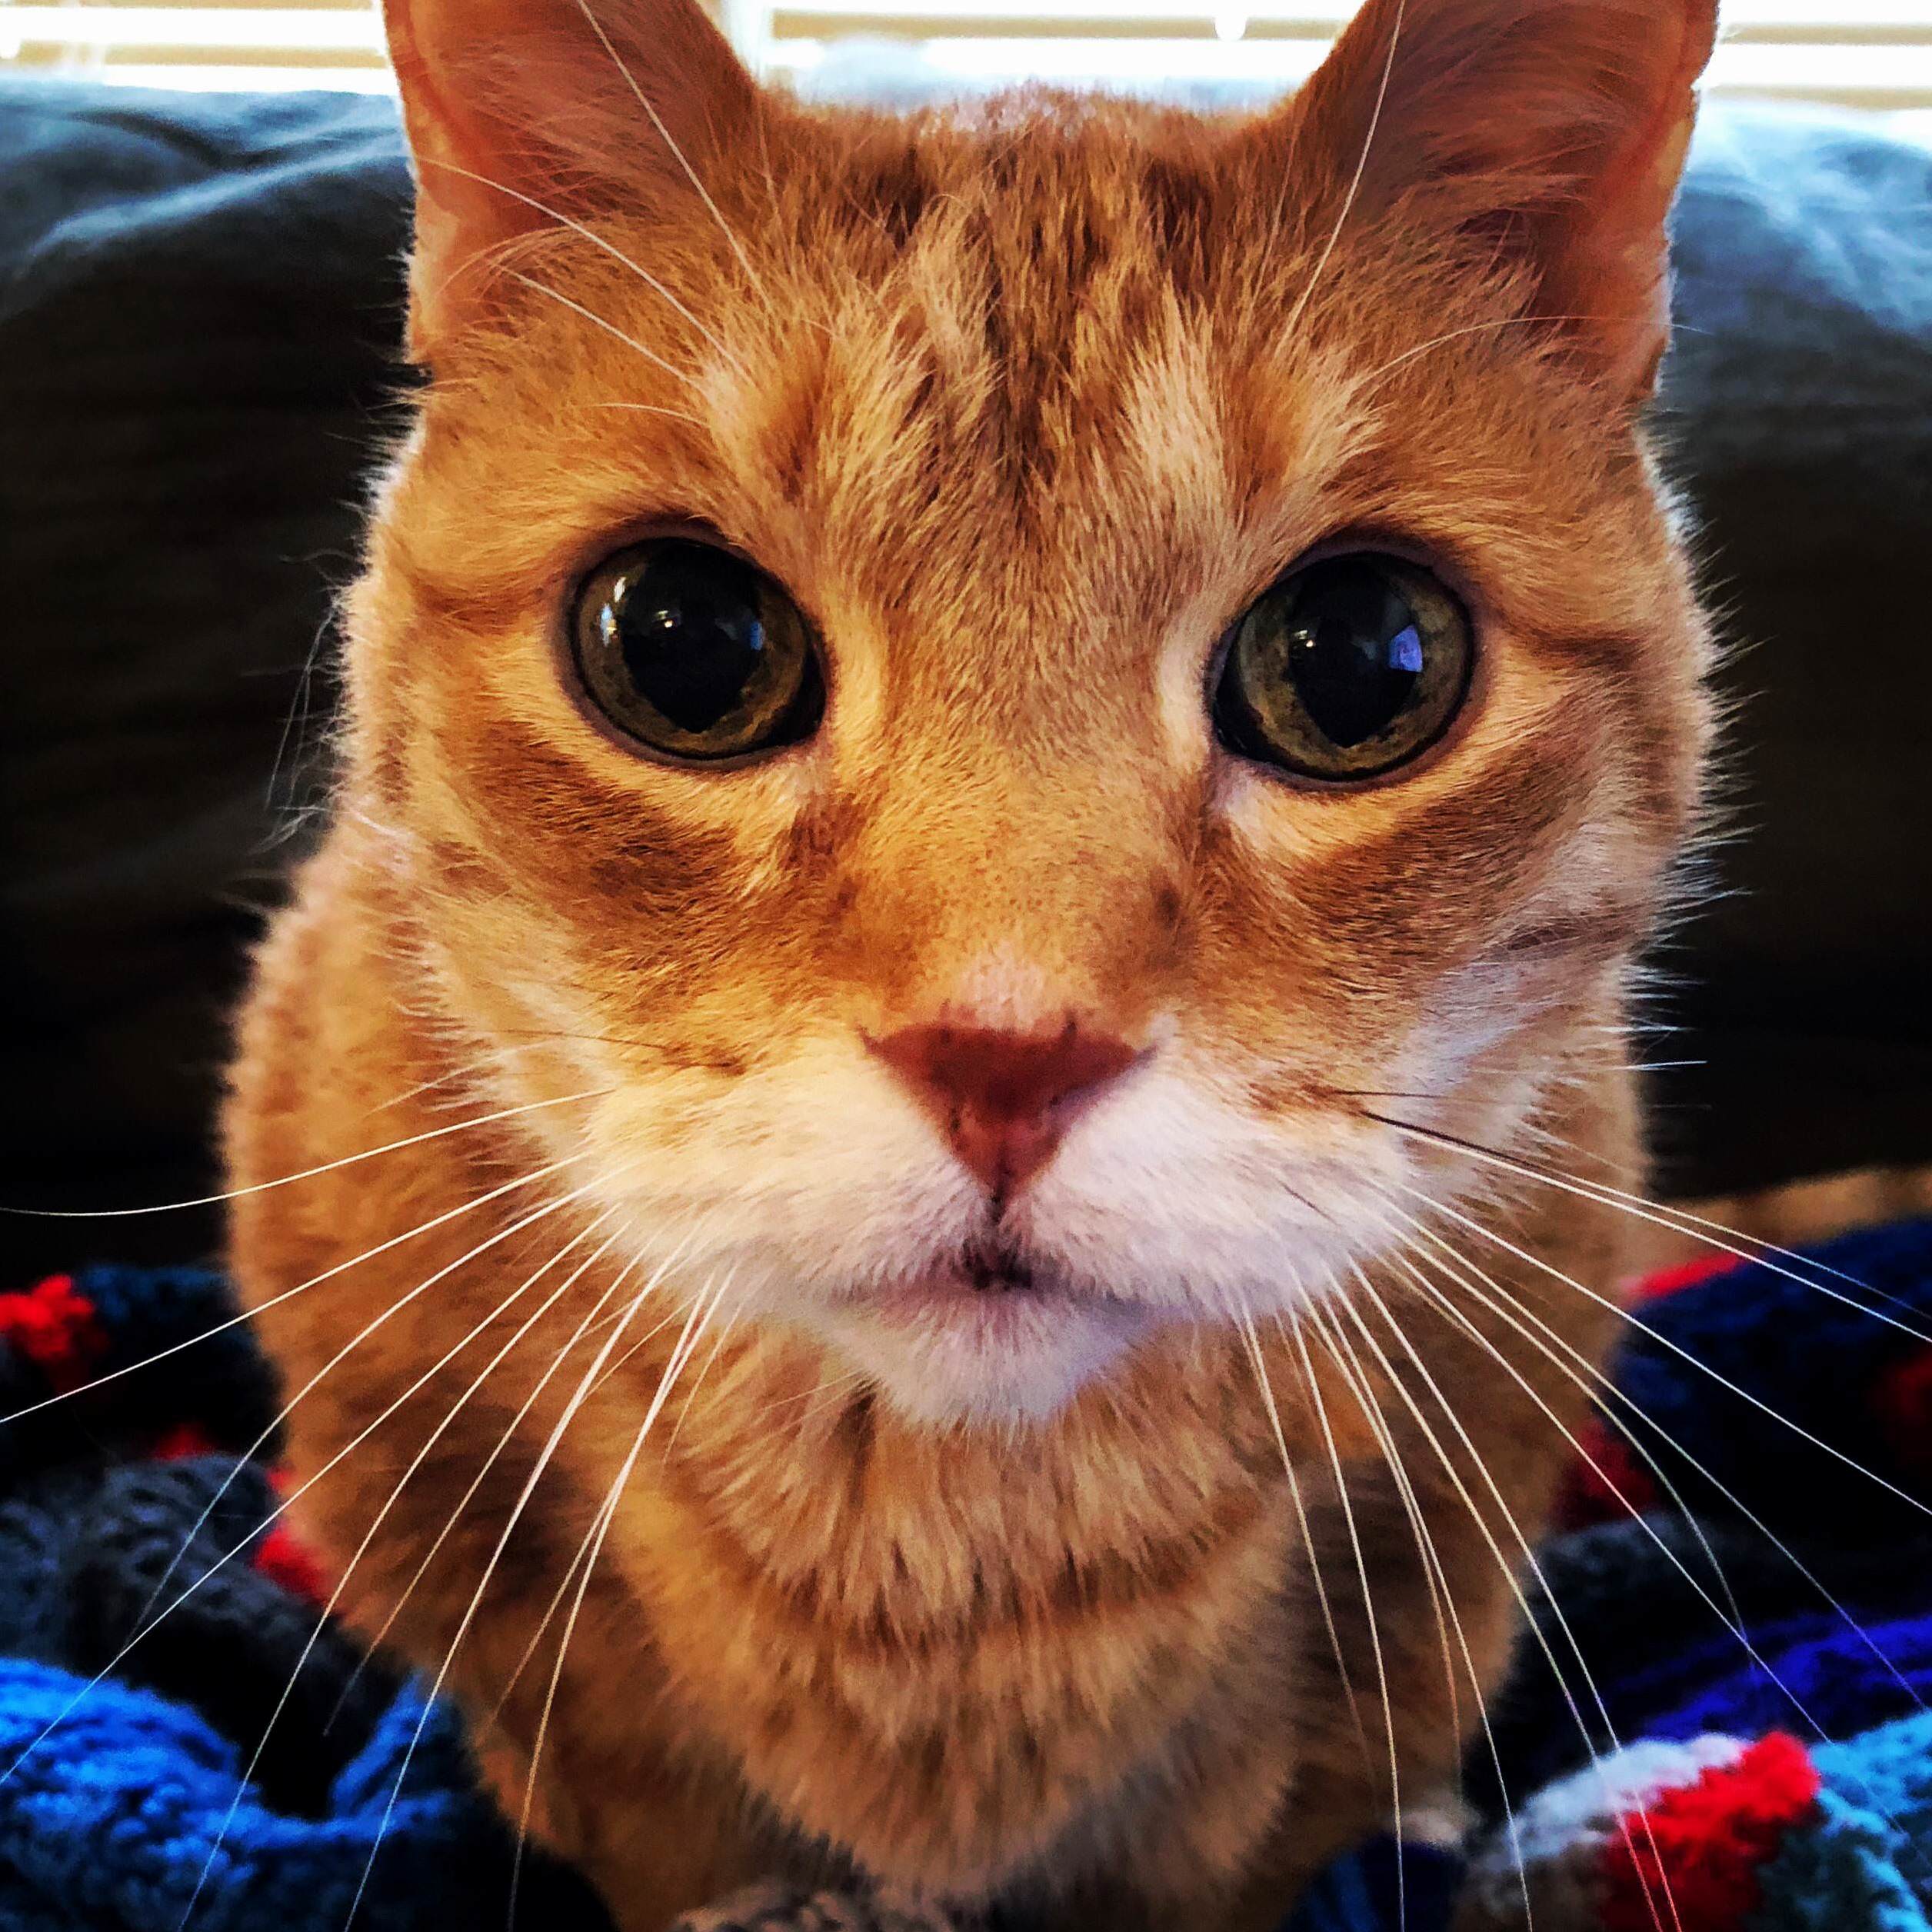 My cat butters turned 15 today. hes my favorite smelly cat.